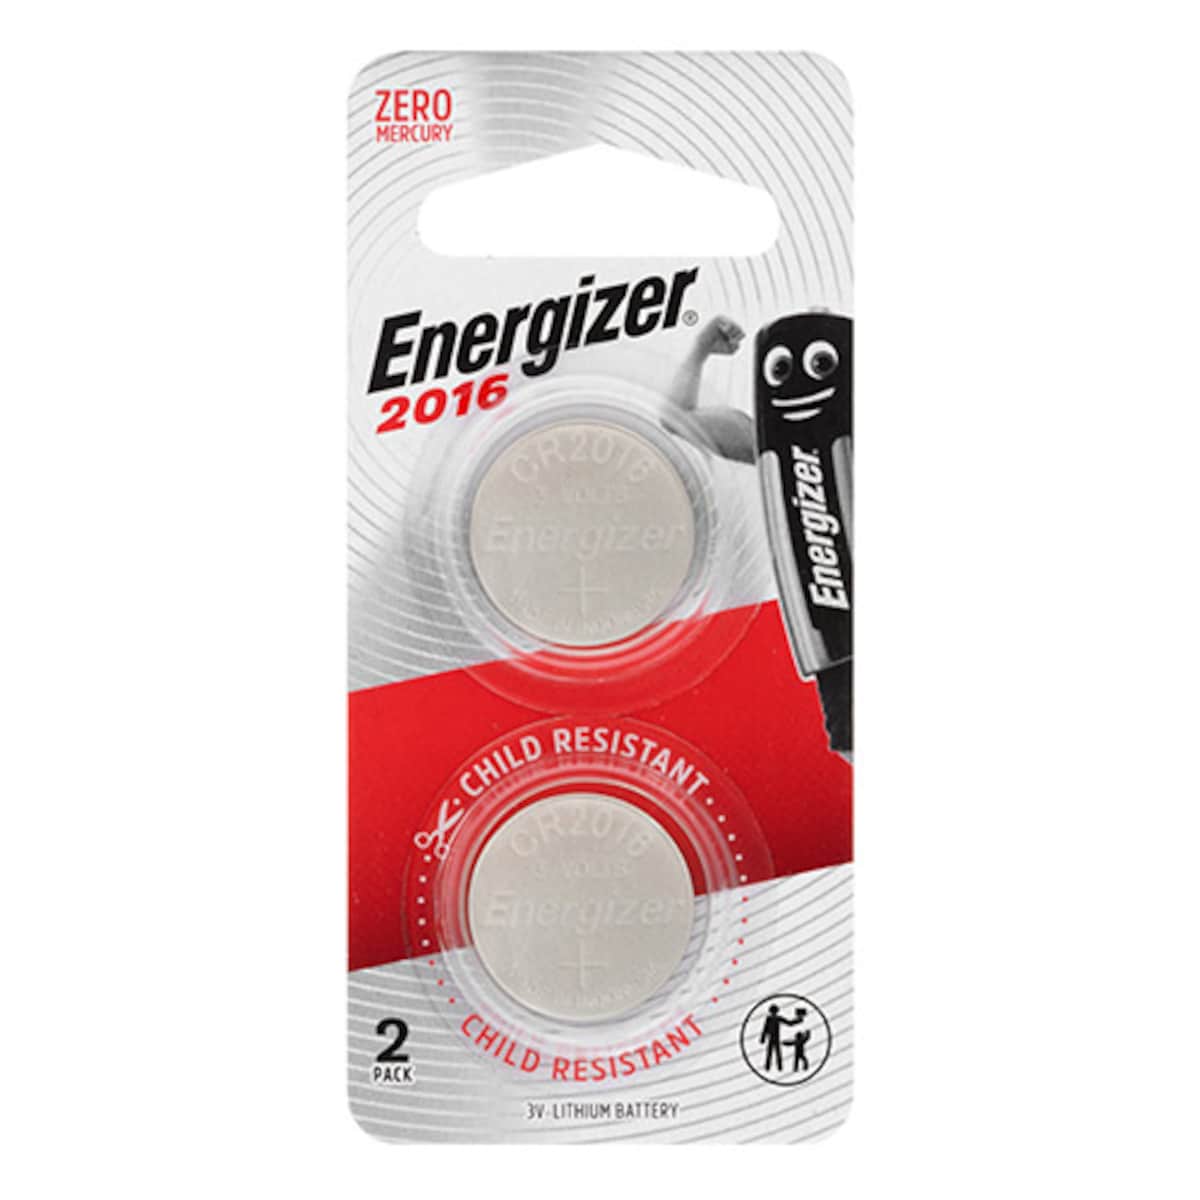 Energizer Lithium Battery Cr2016 2 Pack